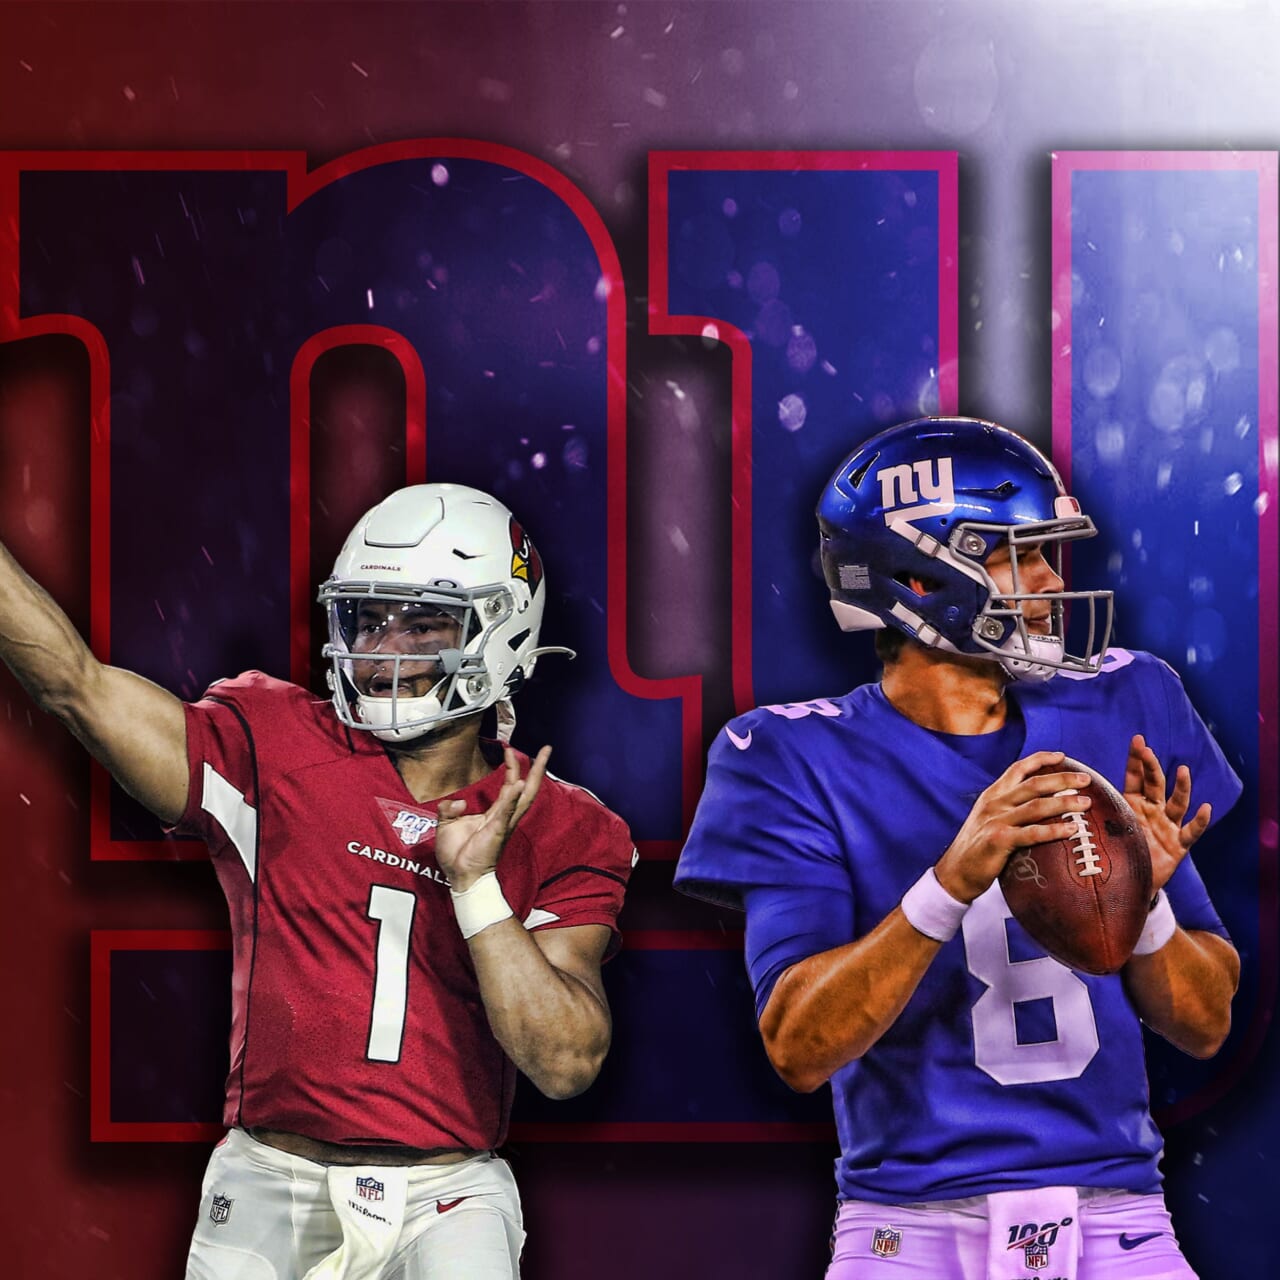 Kyler Murray vs. Daniel Jones, a look at who has the edge leading up to their week 7 matchup